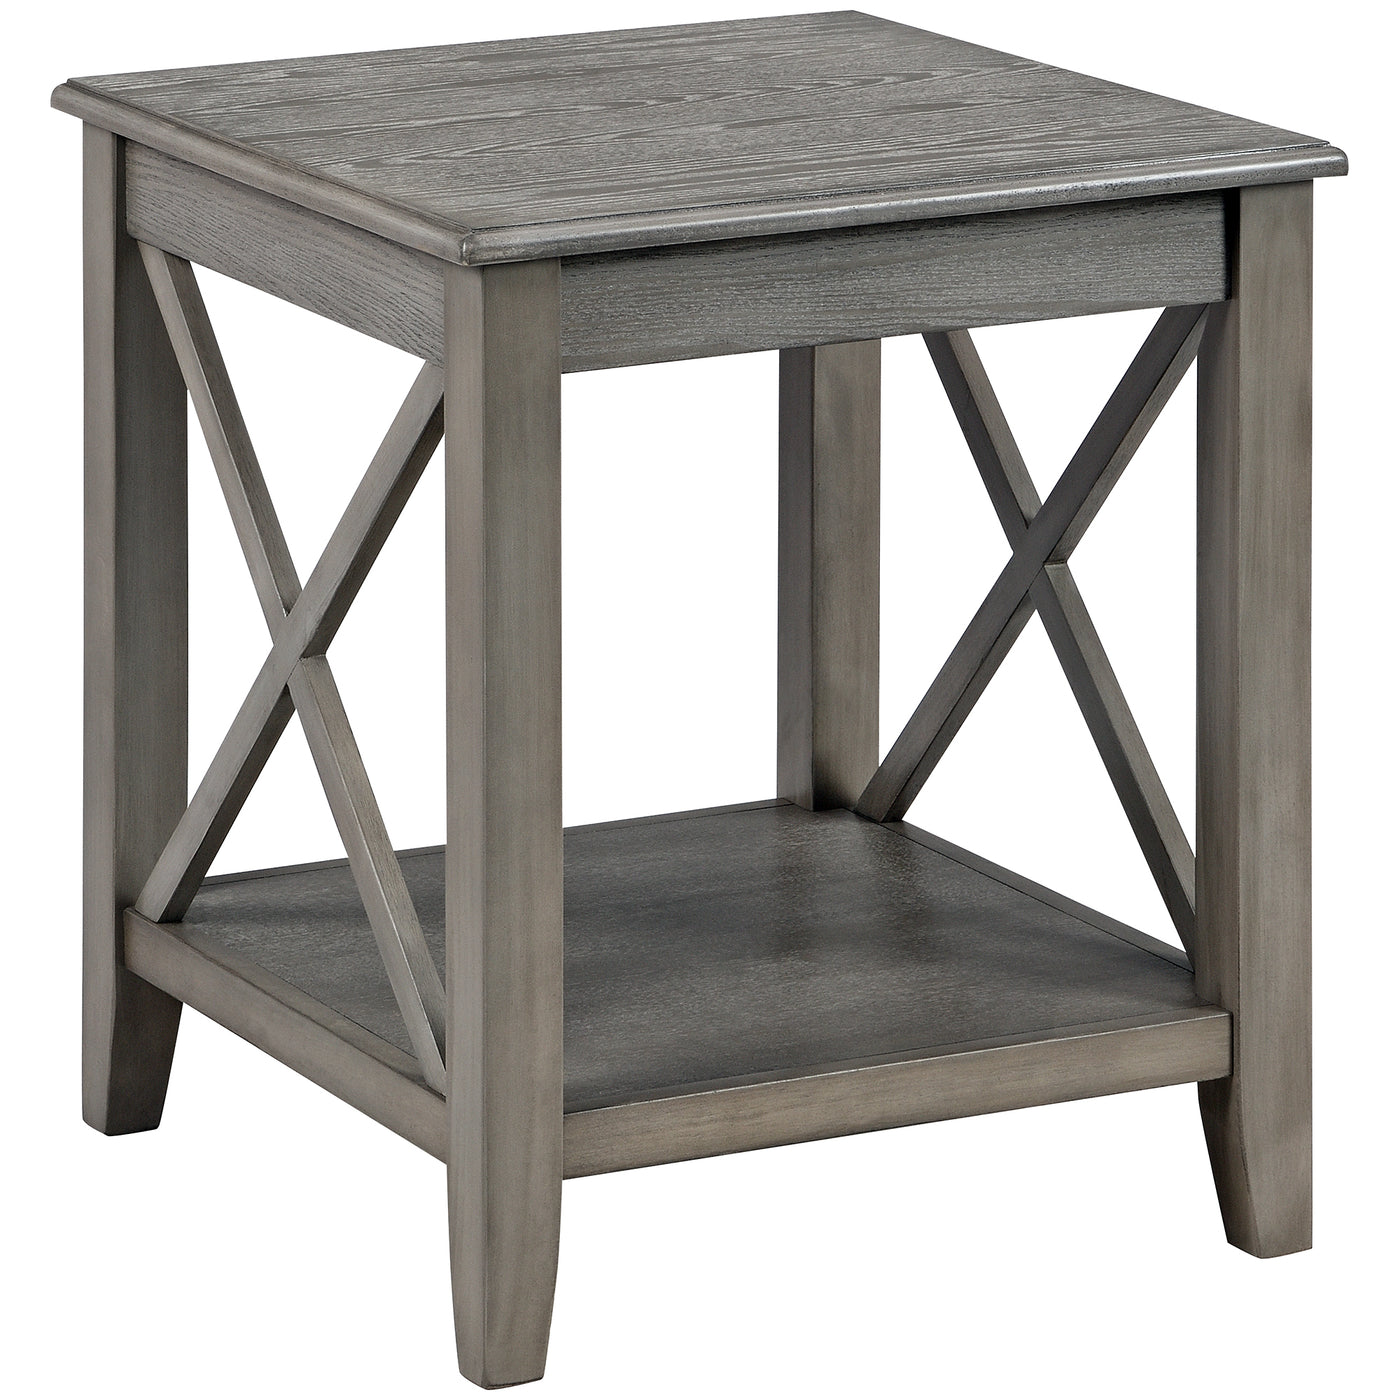 FirsTime & Co. Gray Ashbrook End Table, Farmhouse Style, Made of Wood